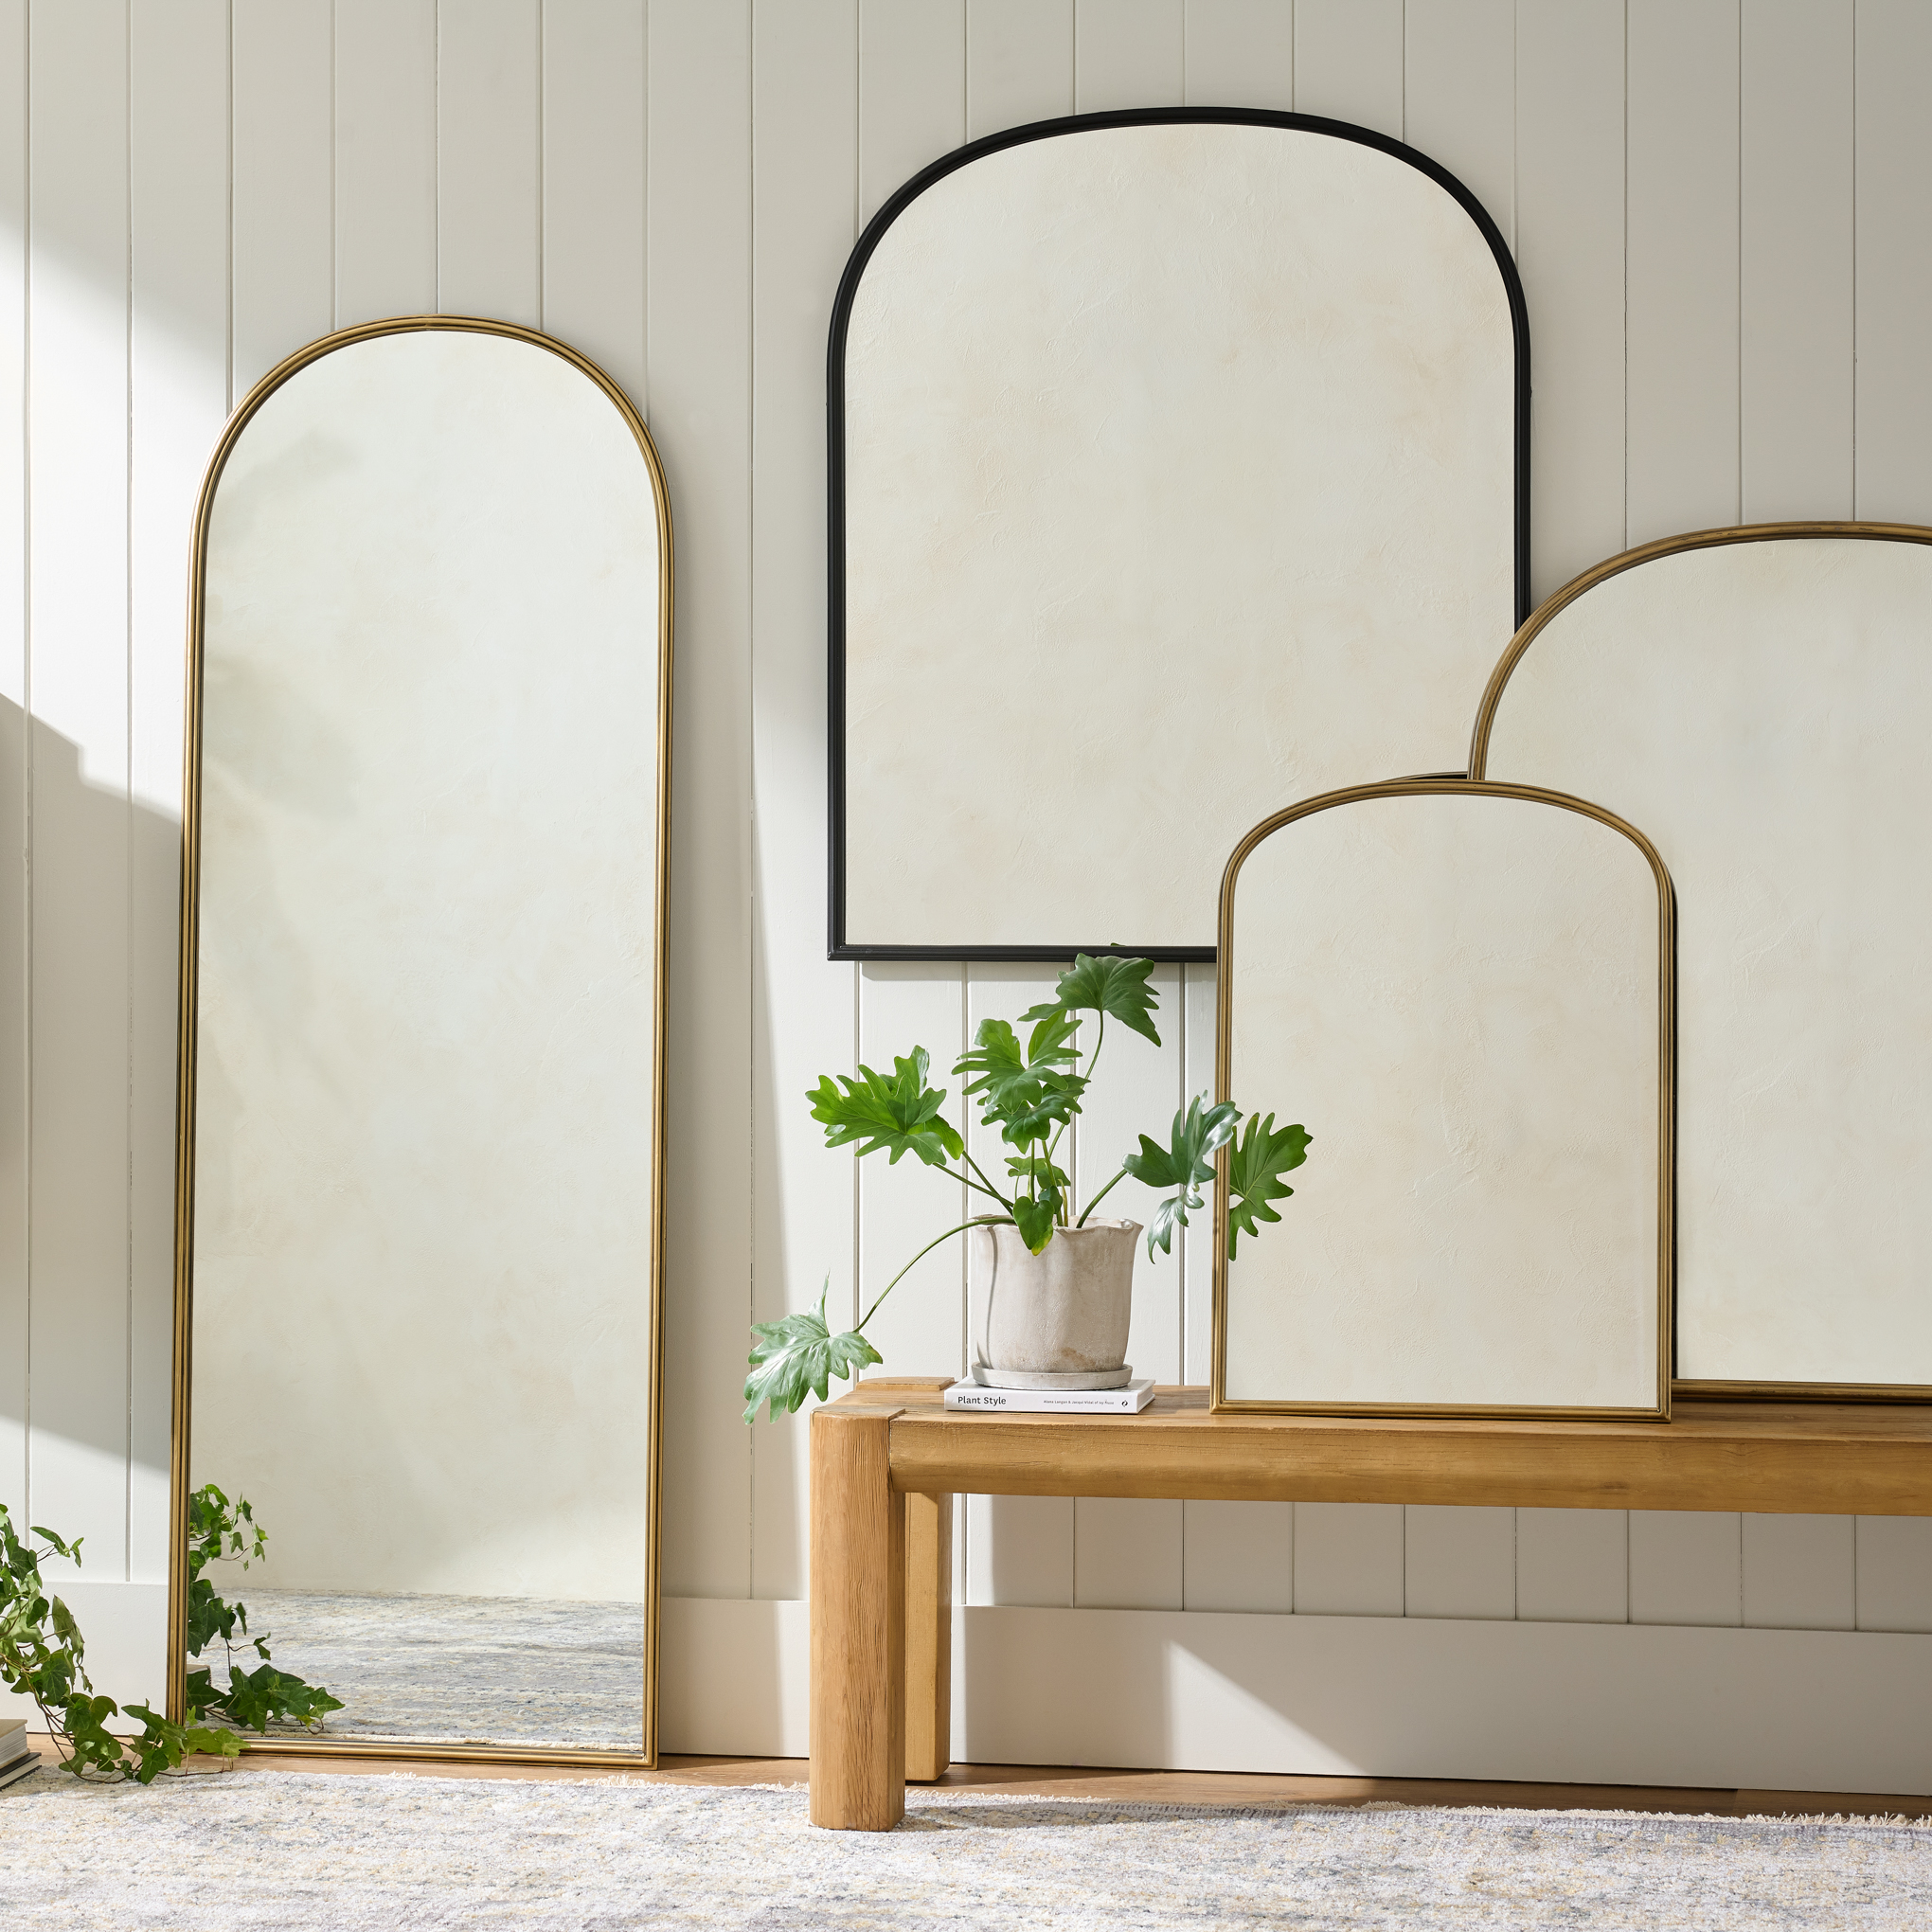 archer wall mirrors sit in a room against a shiplap wall above a bench